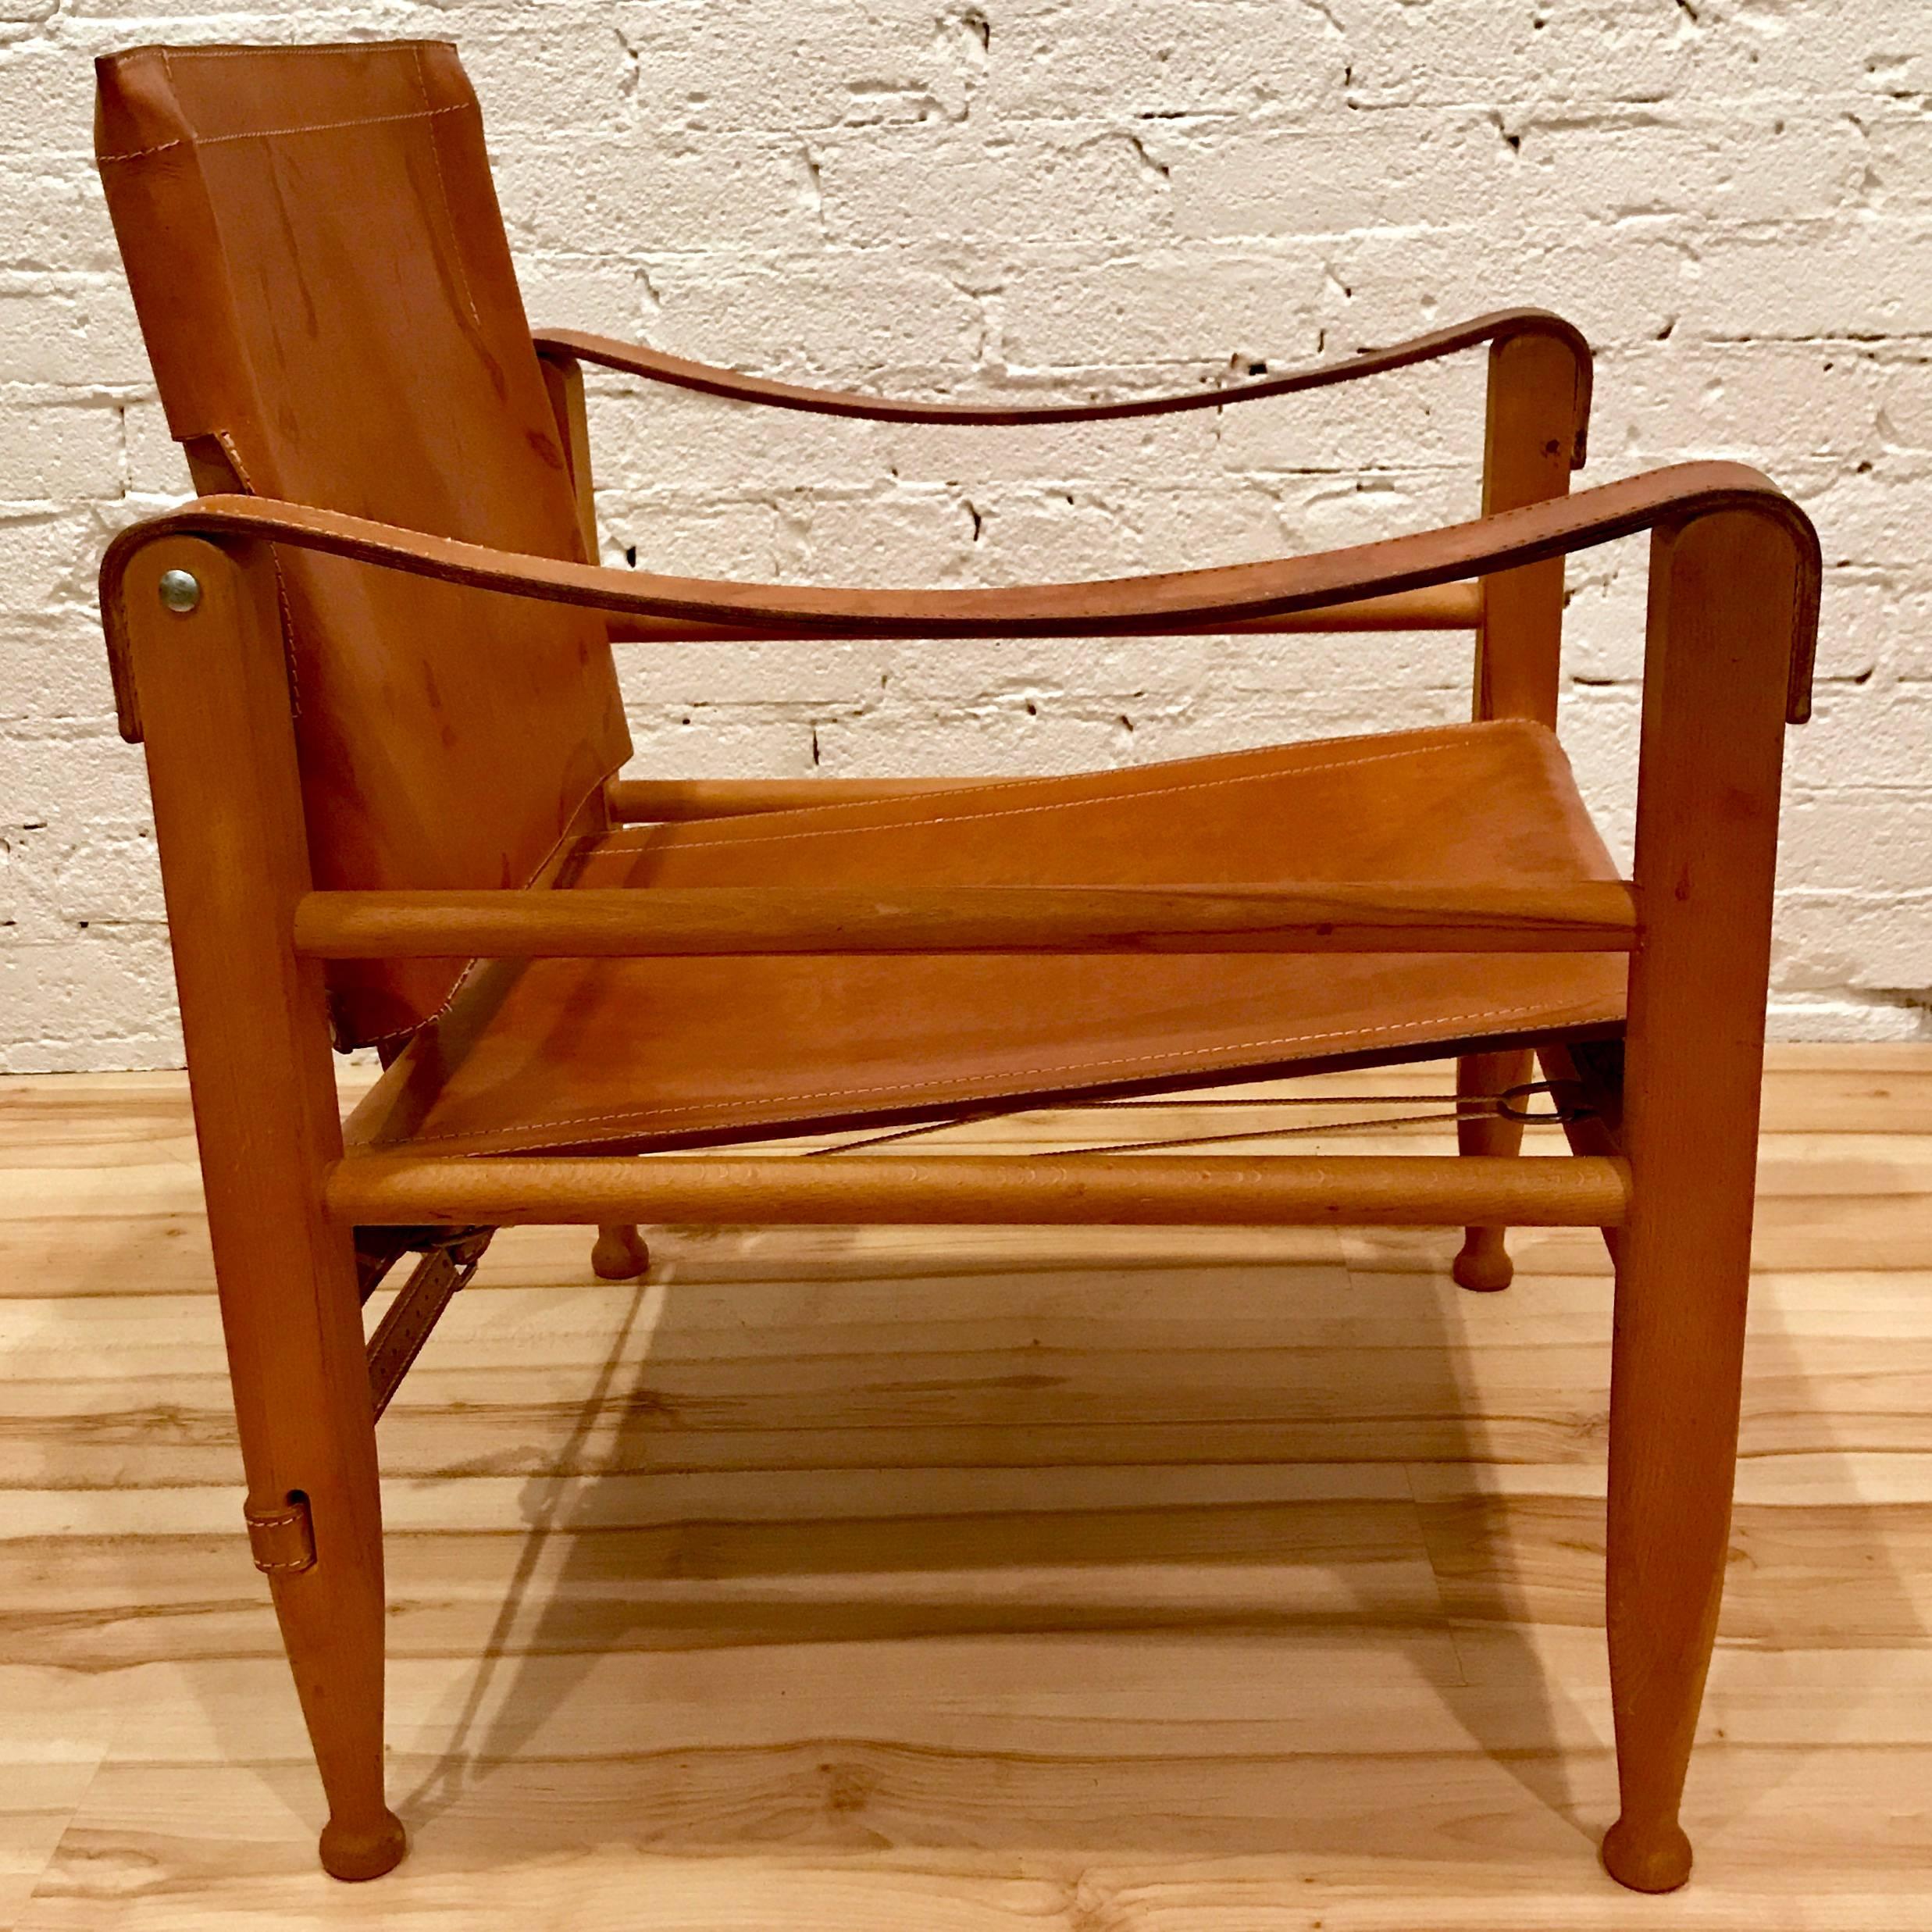 20th Century Pair of Danish Modern Wood and Leather Safari Chairs in the Style of Kaare Klint